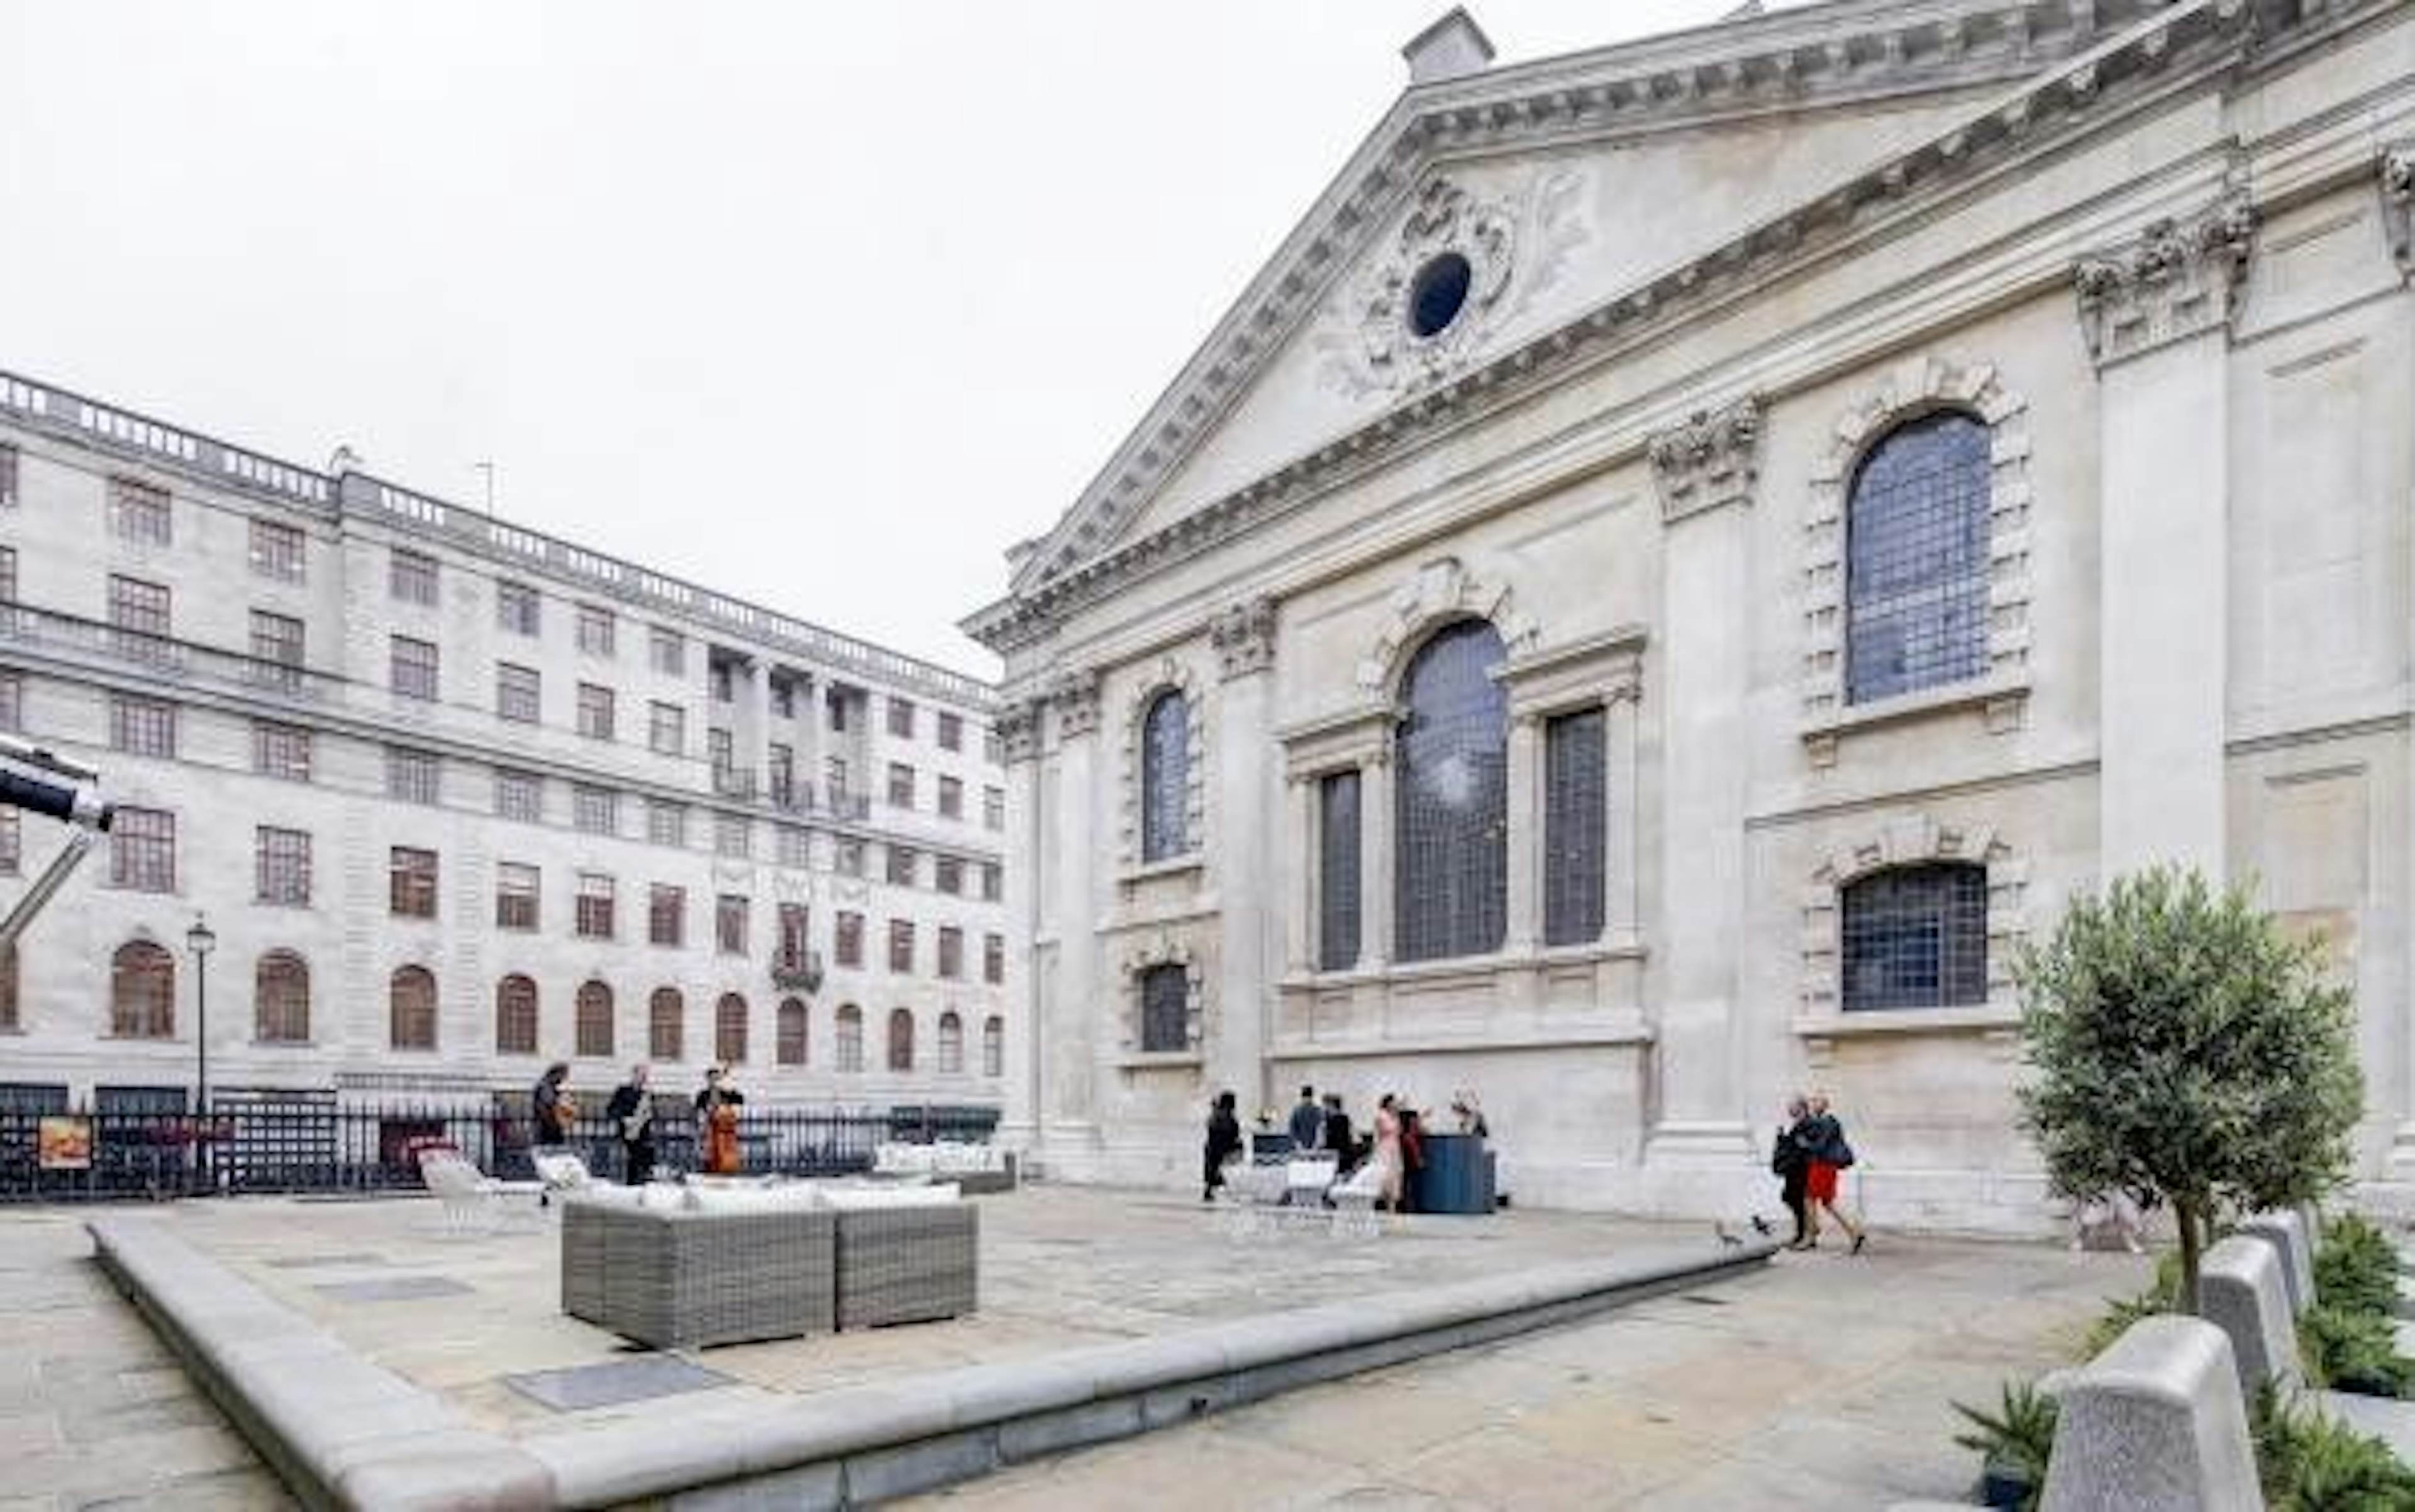 St Martin-in-the-Fields - The Courtyard image 1